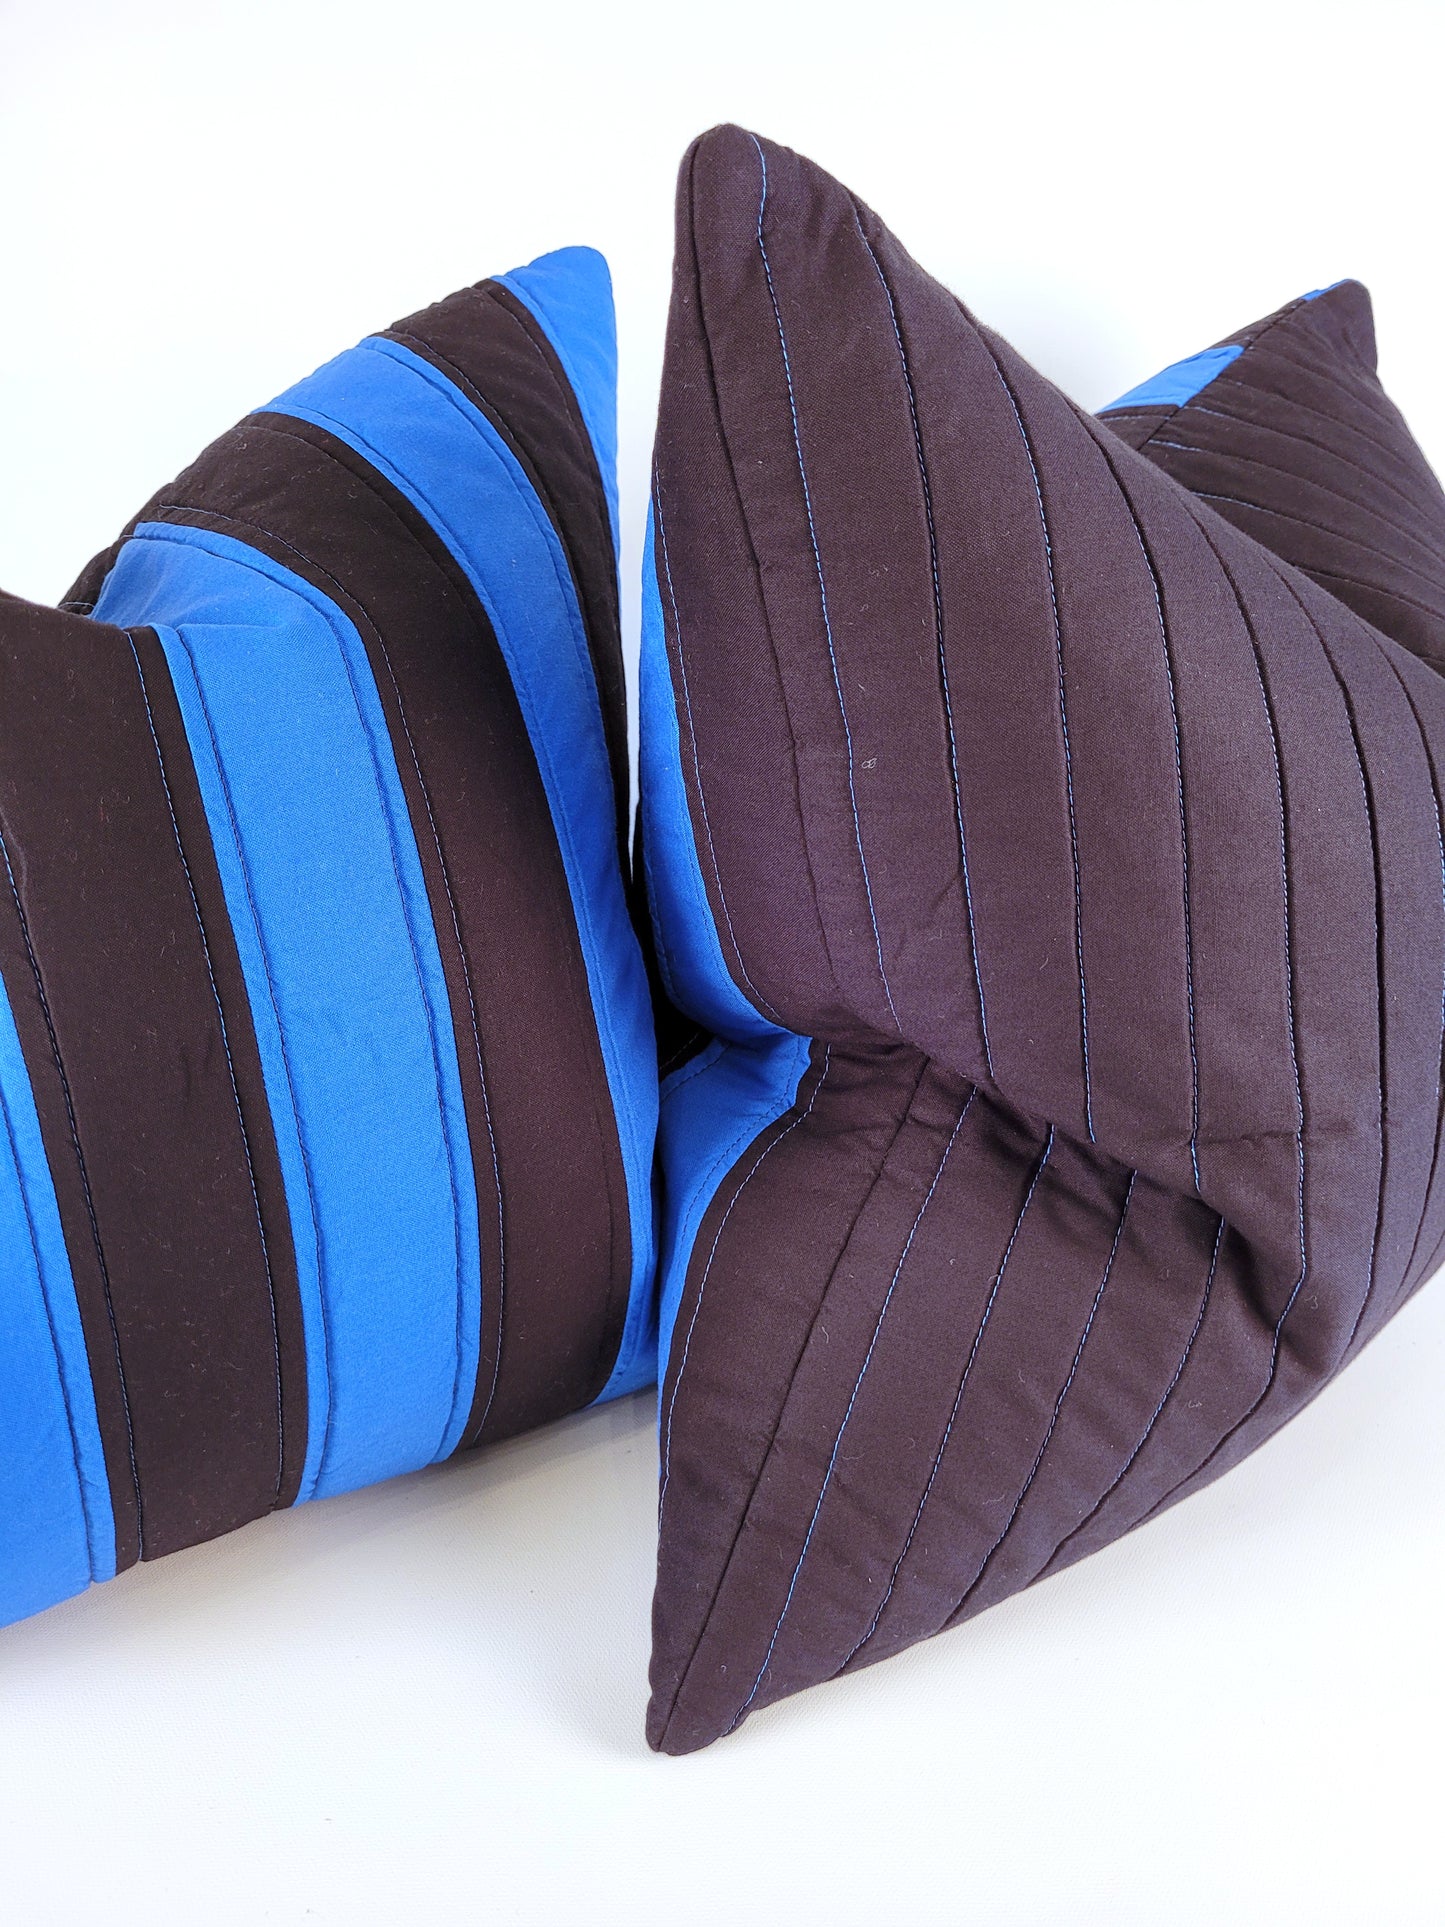 Black and Blue Striped Quilted Pillow with Contrasting Stitching 20"